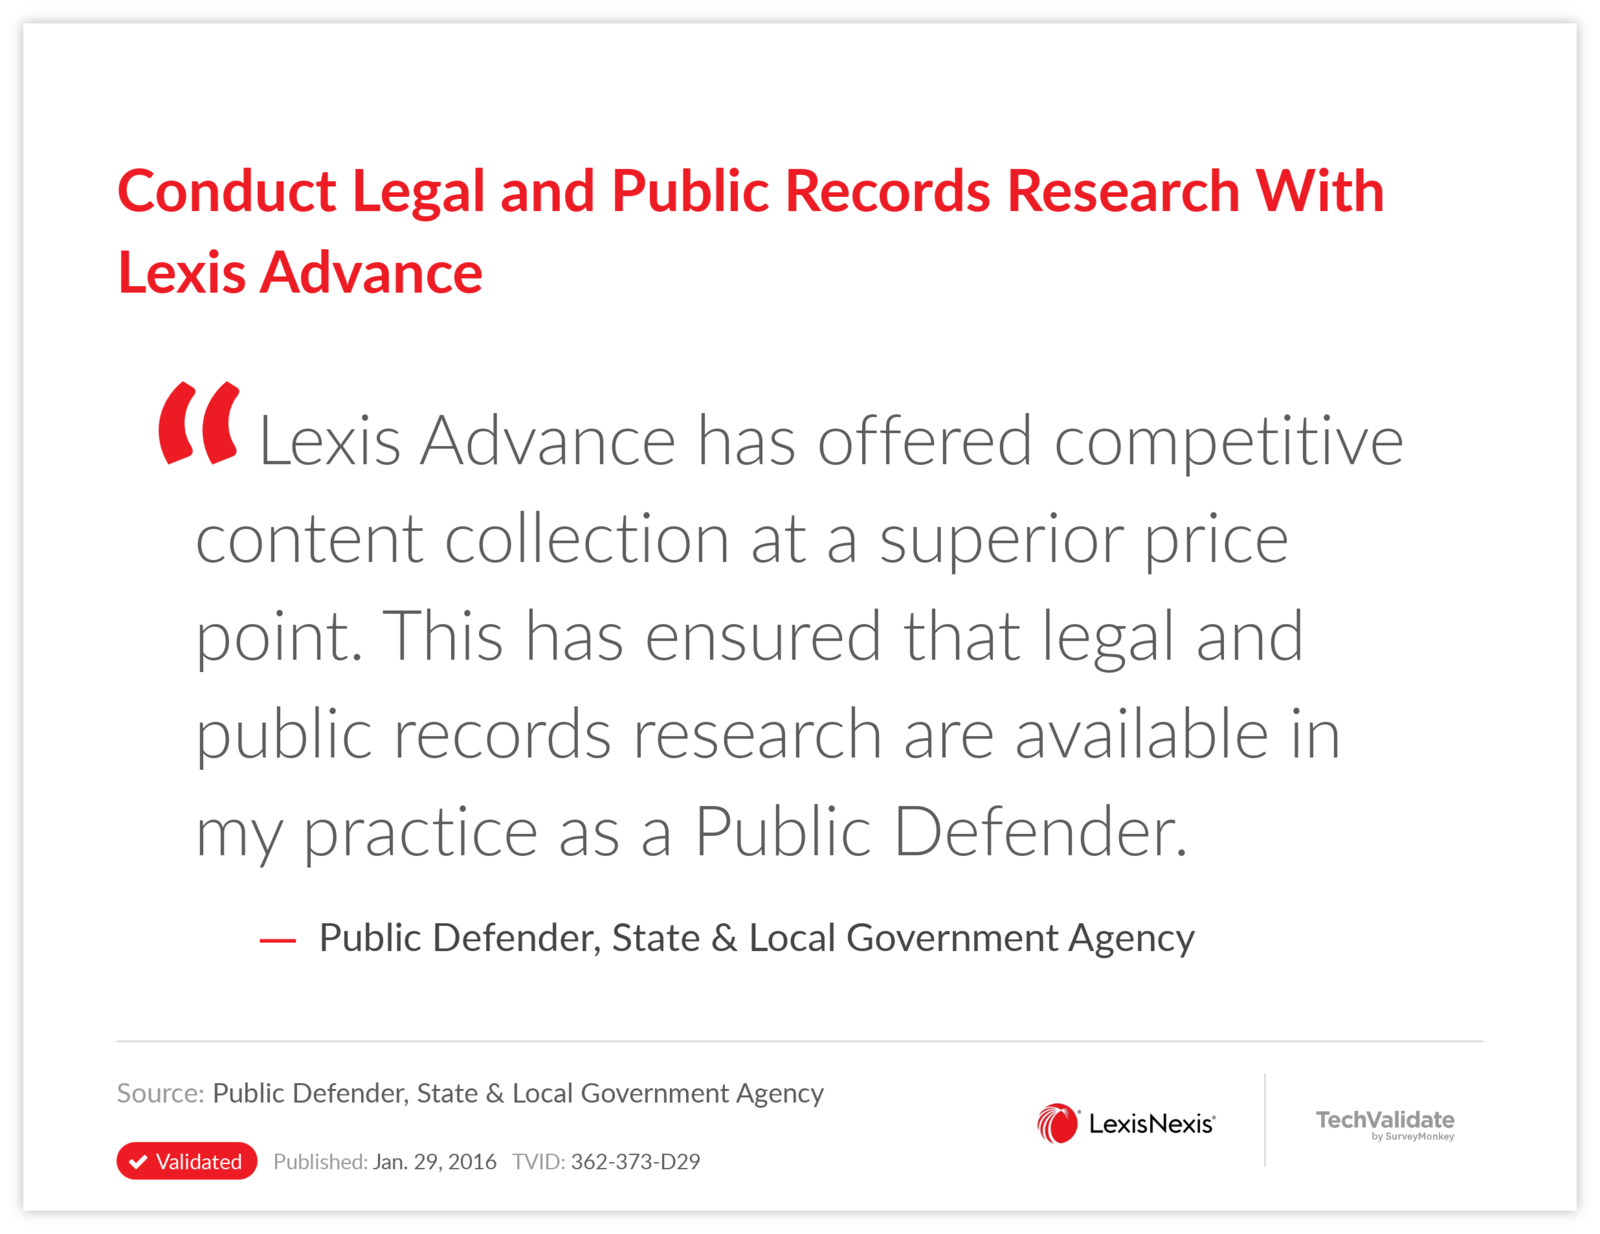 Conduct Legal and Public Records Research With Lexis Advance